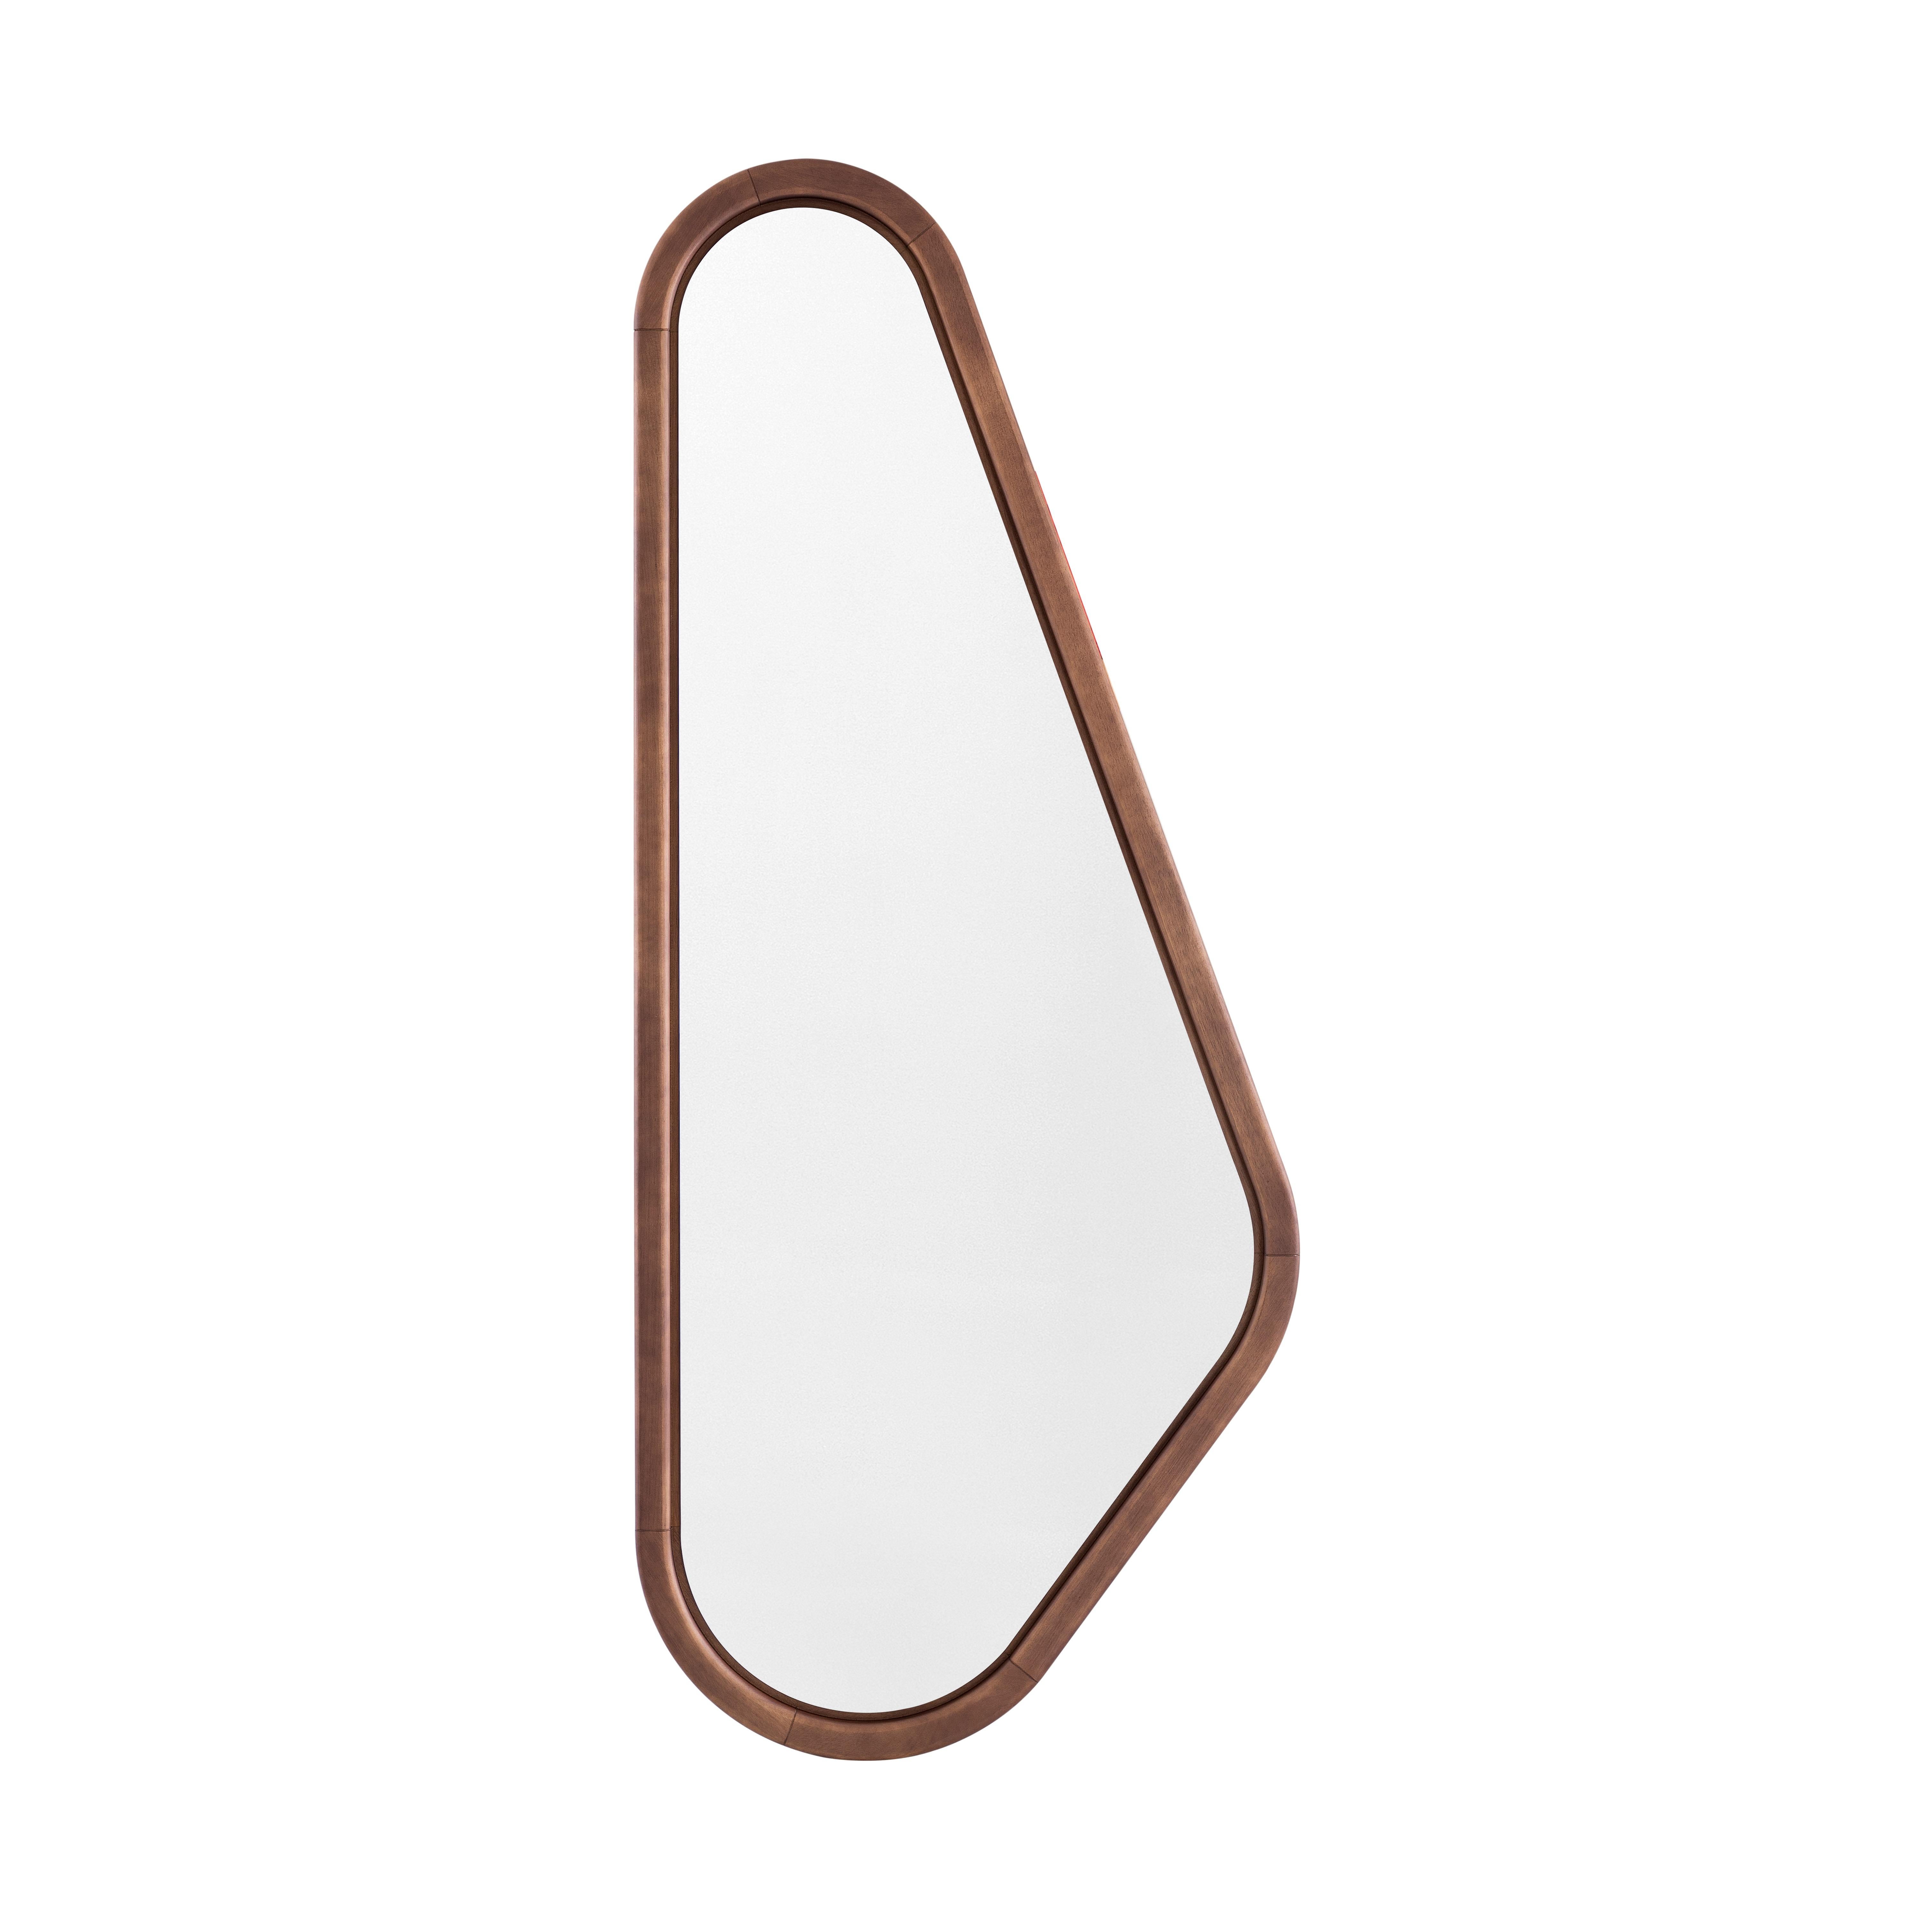 With a light and refined design, the Ali mirror series incorporates a natural touch into any area of the home. Ali, which is the Italian word for ‘wings’, refers to the piece’s unique design. Together, the mirrors form two wings that bring a sense